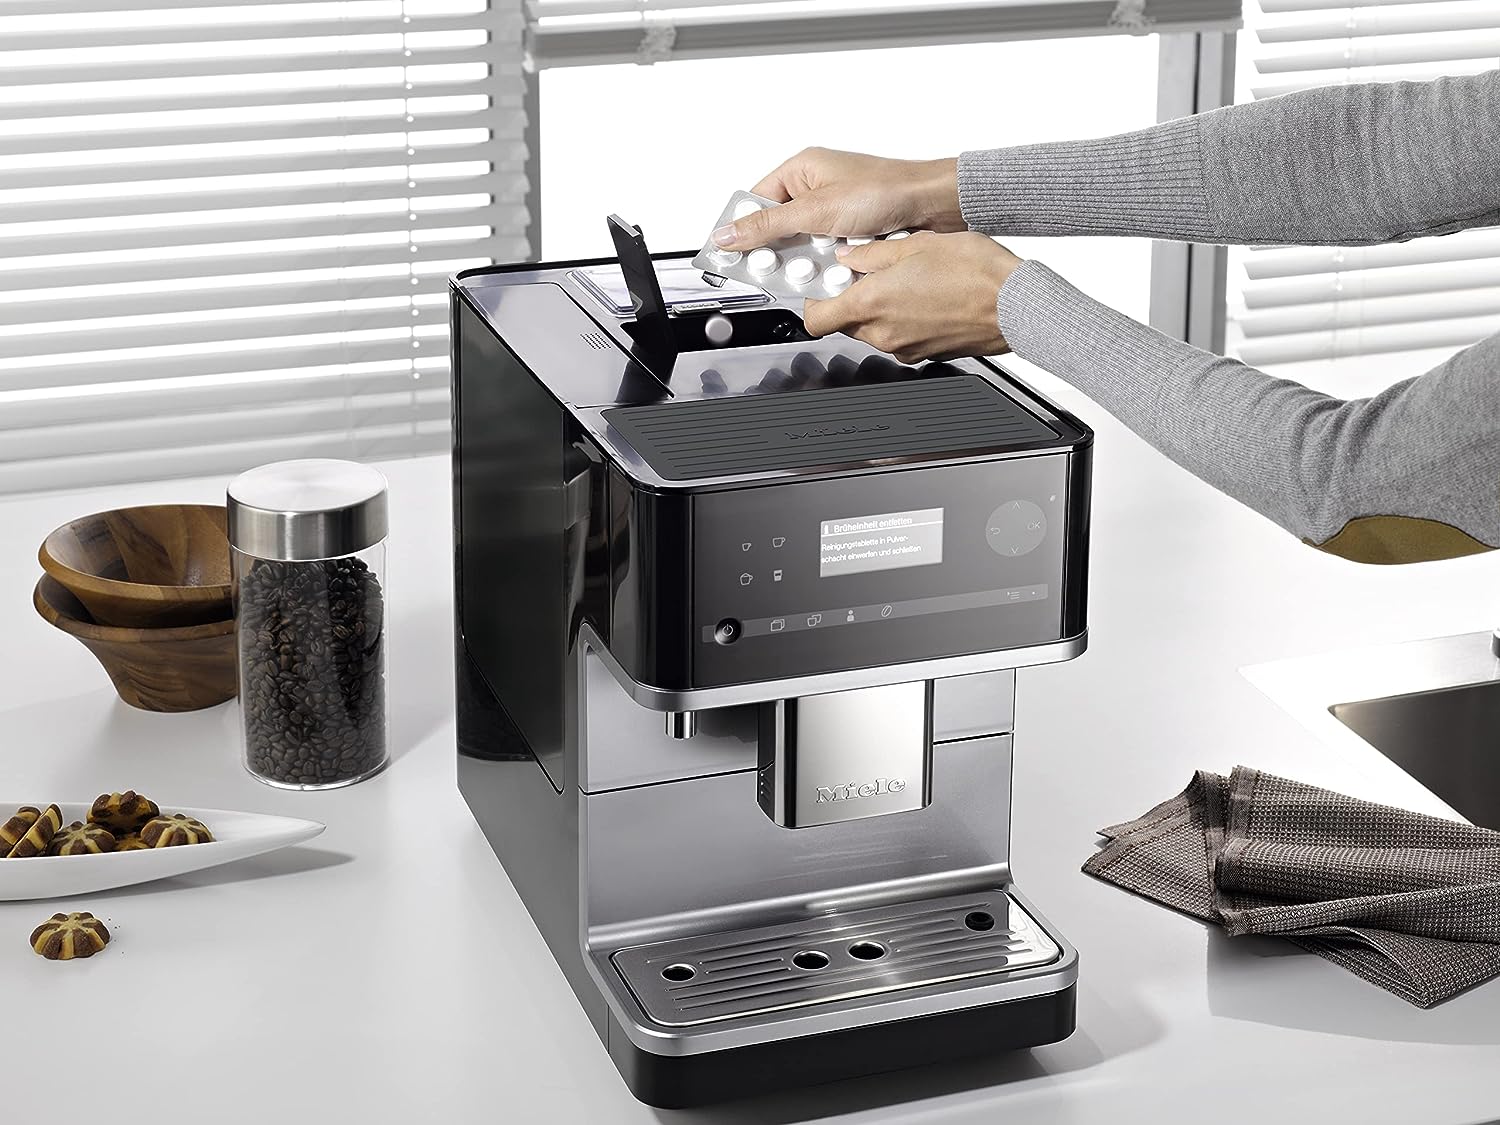 Where To Put Cleaning Tablet In Miele Coffee Machine